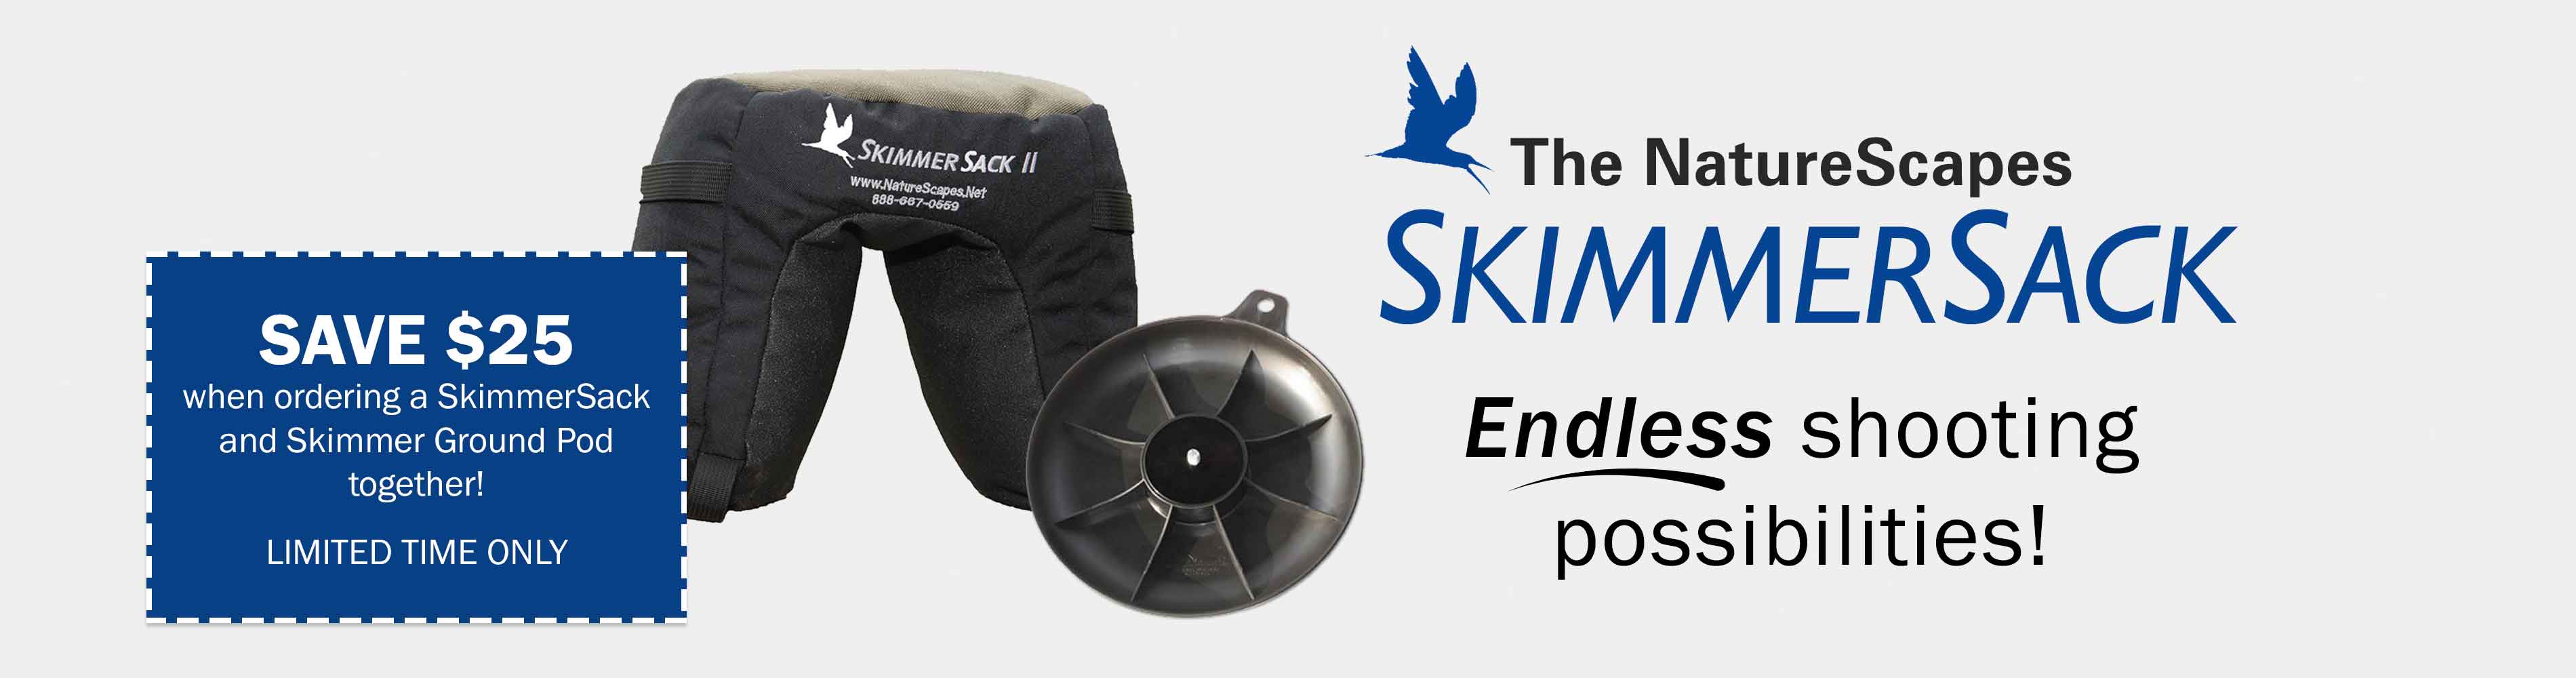 Save $25 when ordering a SkimmerSack and Skimmer Ground Pod together! Limited time only.